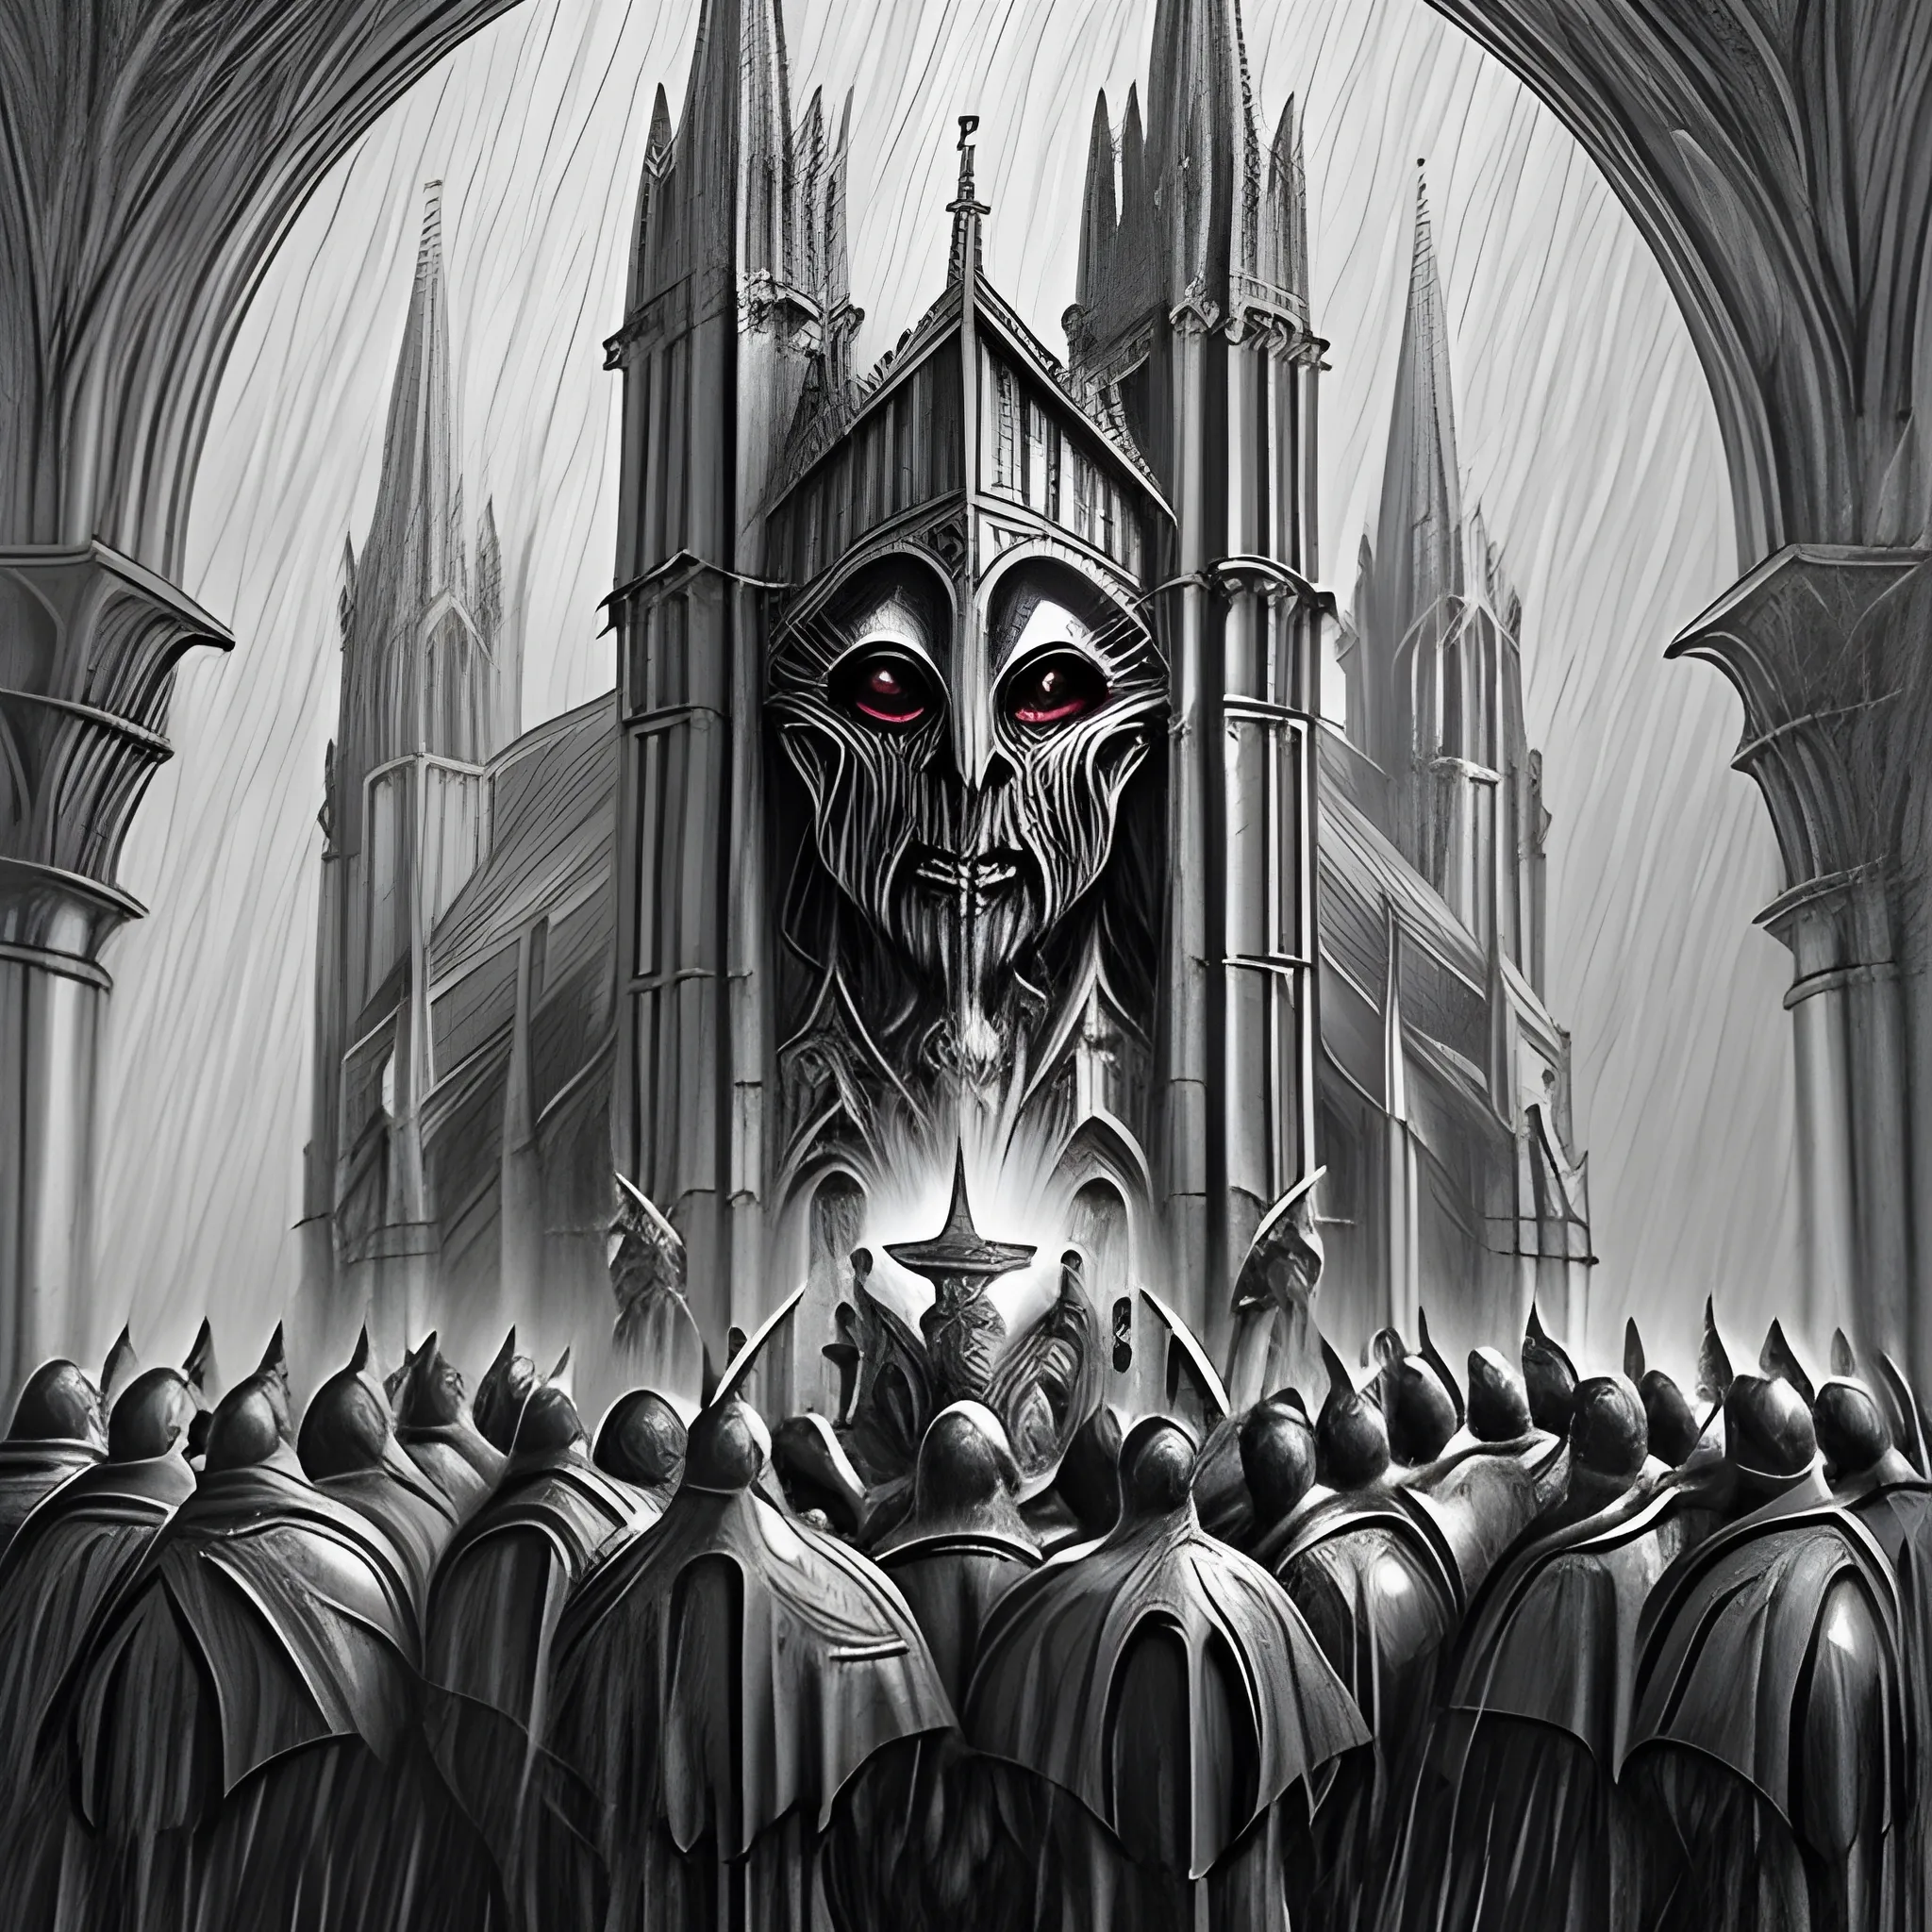 pouring rain on a cathedral heavily decorated with ancient Gothic-style gargoyles and an army of Templar knights huddled around an Alien wielding the Holy Grail, Pencil Sketch